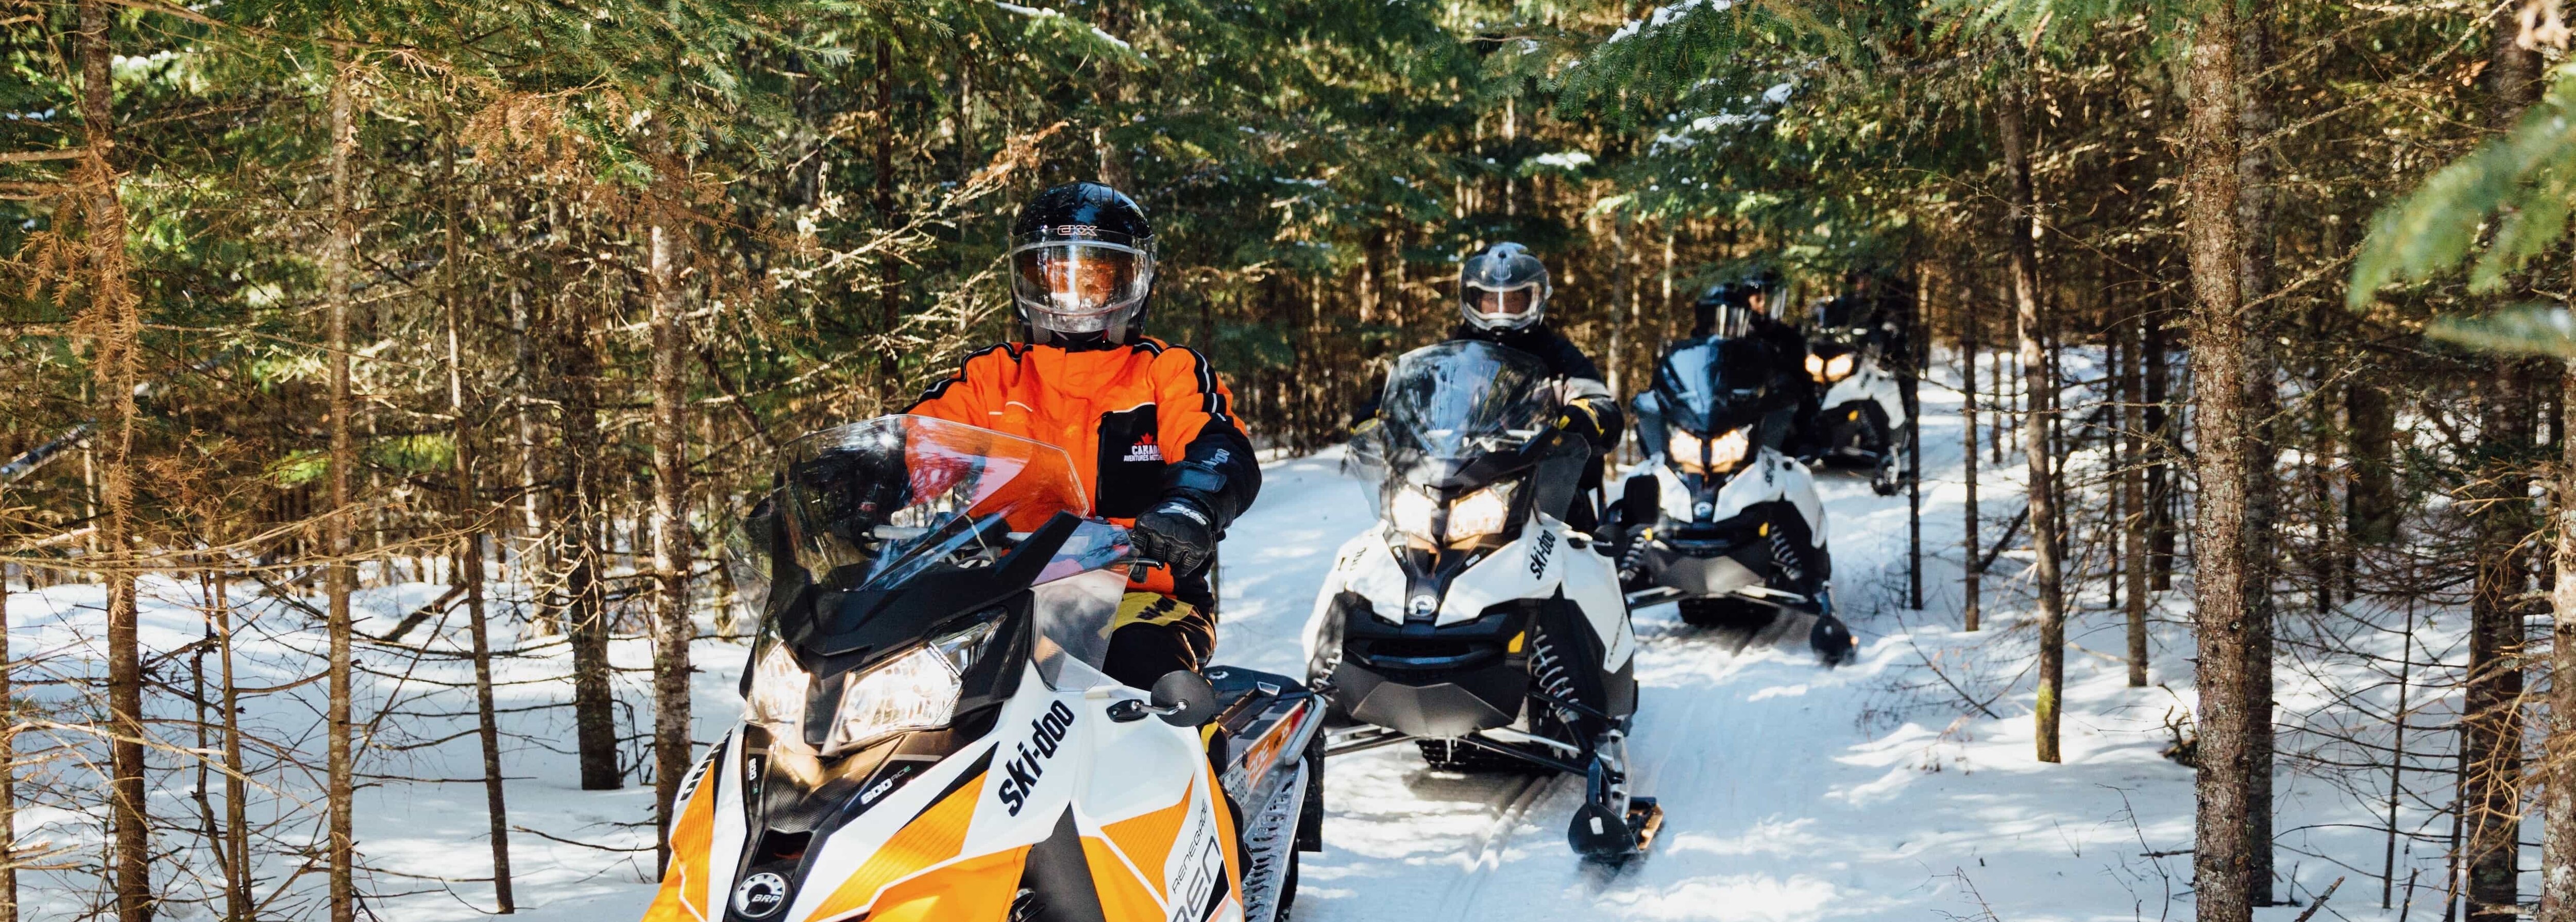 A group of people riding Ski-Doo in a trail